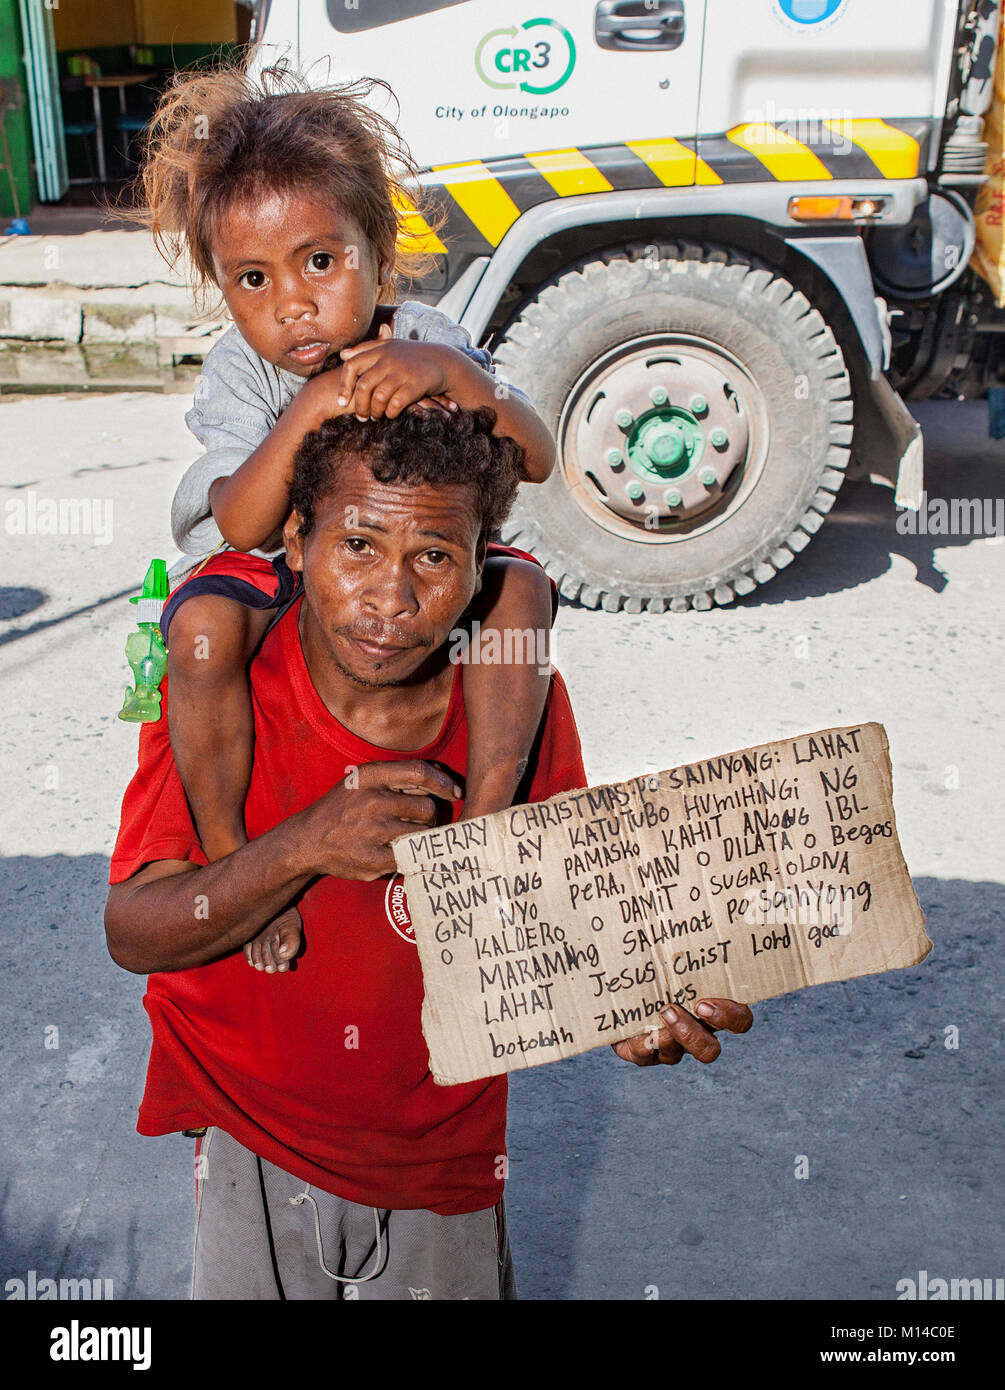 A Filipino Aeta man carries his child on his shoulders and a sign asking for food and work and with a Christmas wish in Barretto Town, Luzon, Philippi. Stock Photo